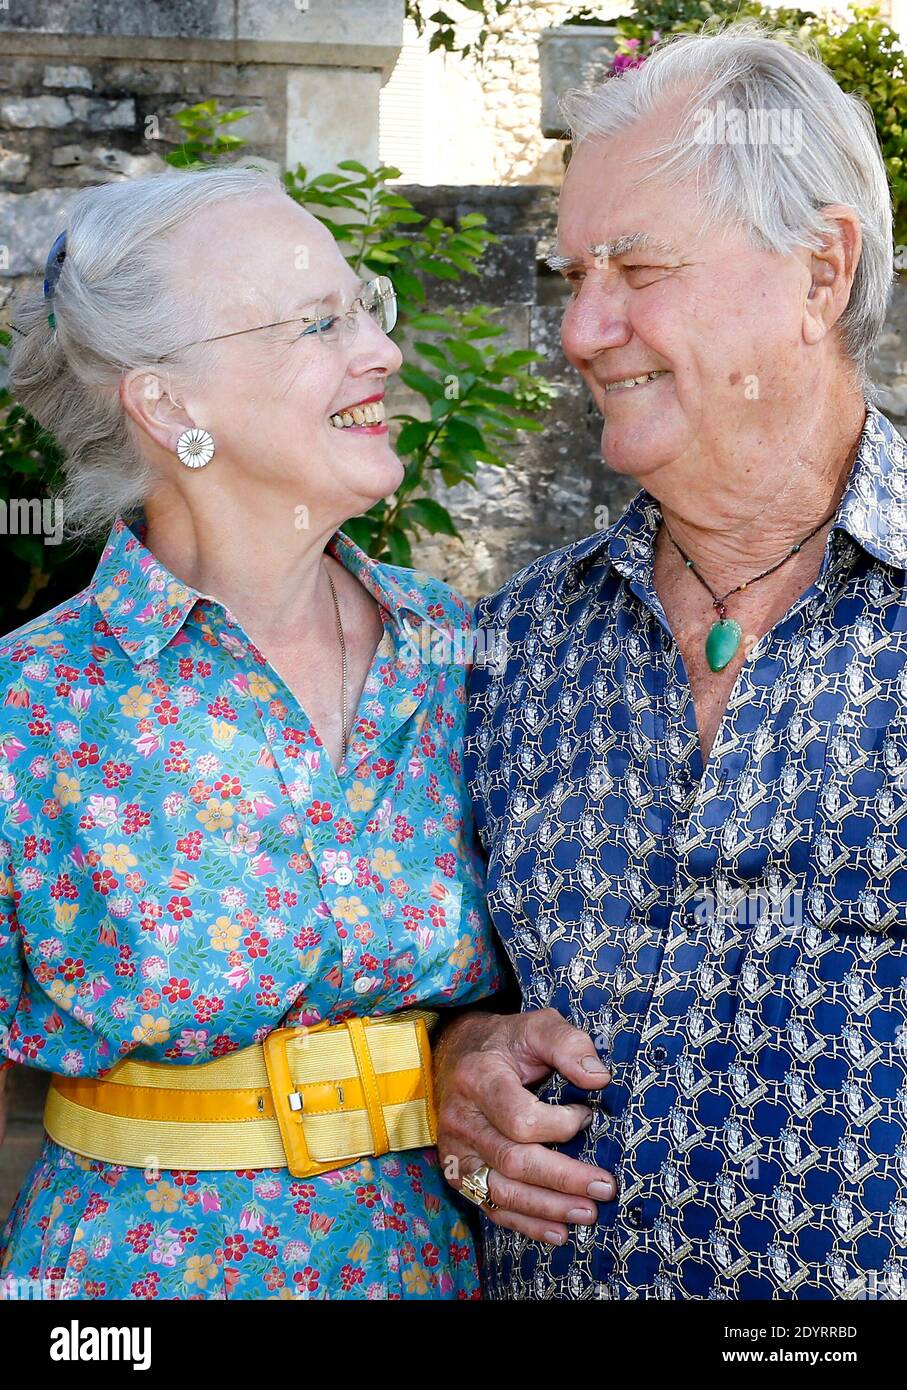 NO WEB/NO APPS/NO TABLOIDS - SPECIAL FEE REQUIRED - Exclusive. Queen Margrethe II and Prince Consort Henrik of Denmark spend their annual summer vacation at Chateau de Caix, near Cahors, southwestern France on August 14, 2013. The 25-hectare family estate produces about 160,000 bottles of 'Cahors' red, white and rose wine. Prince Henrik prefers red wine (because the grapes are hand-picked), which represents 70% of the castle's production. Best-selling around the world are the 2002 to 2005 vintages called 'La Cuvee du Prince du Danemark, Chateau de Caix, Cahors'. 10% of the Prince's wine are so Stock Photo